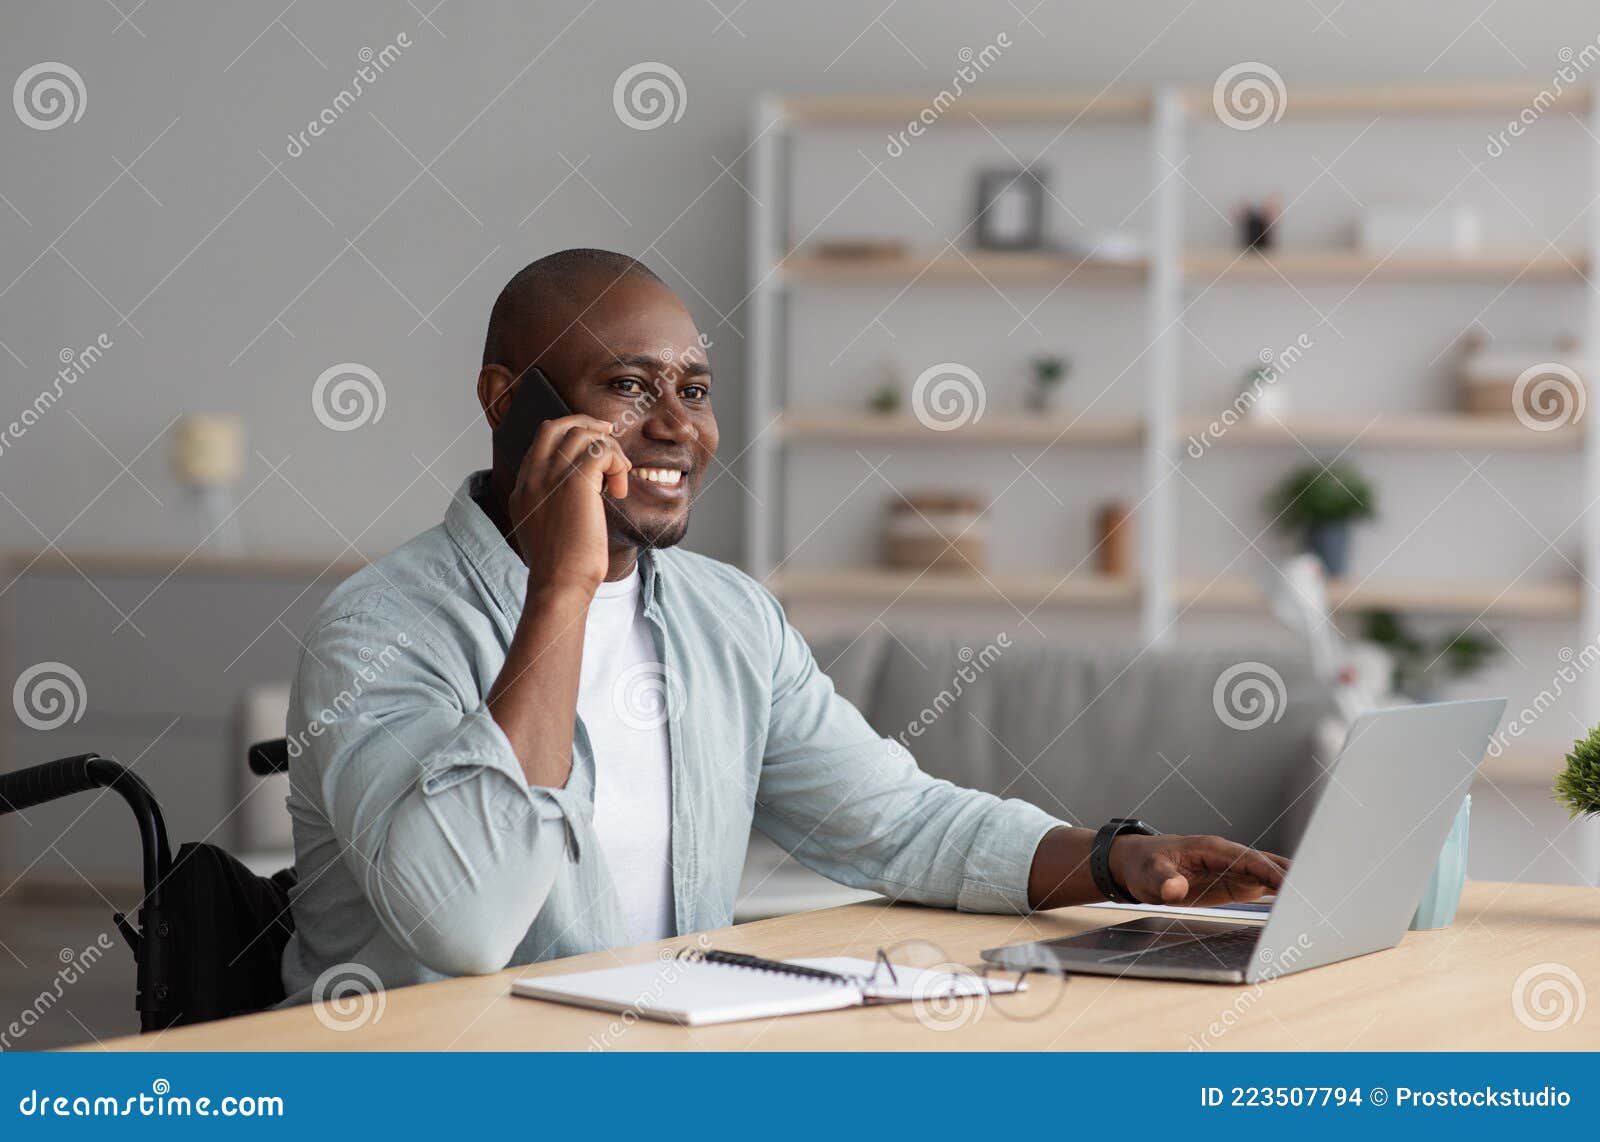 Modern Work from Home, Gadgets for Communication with Client, New